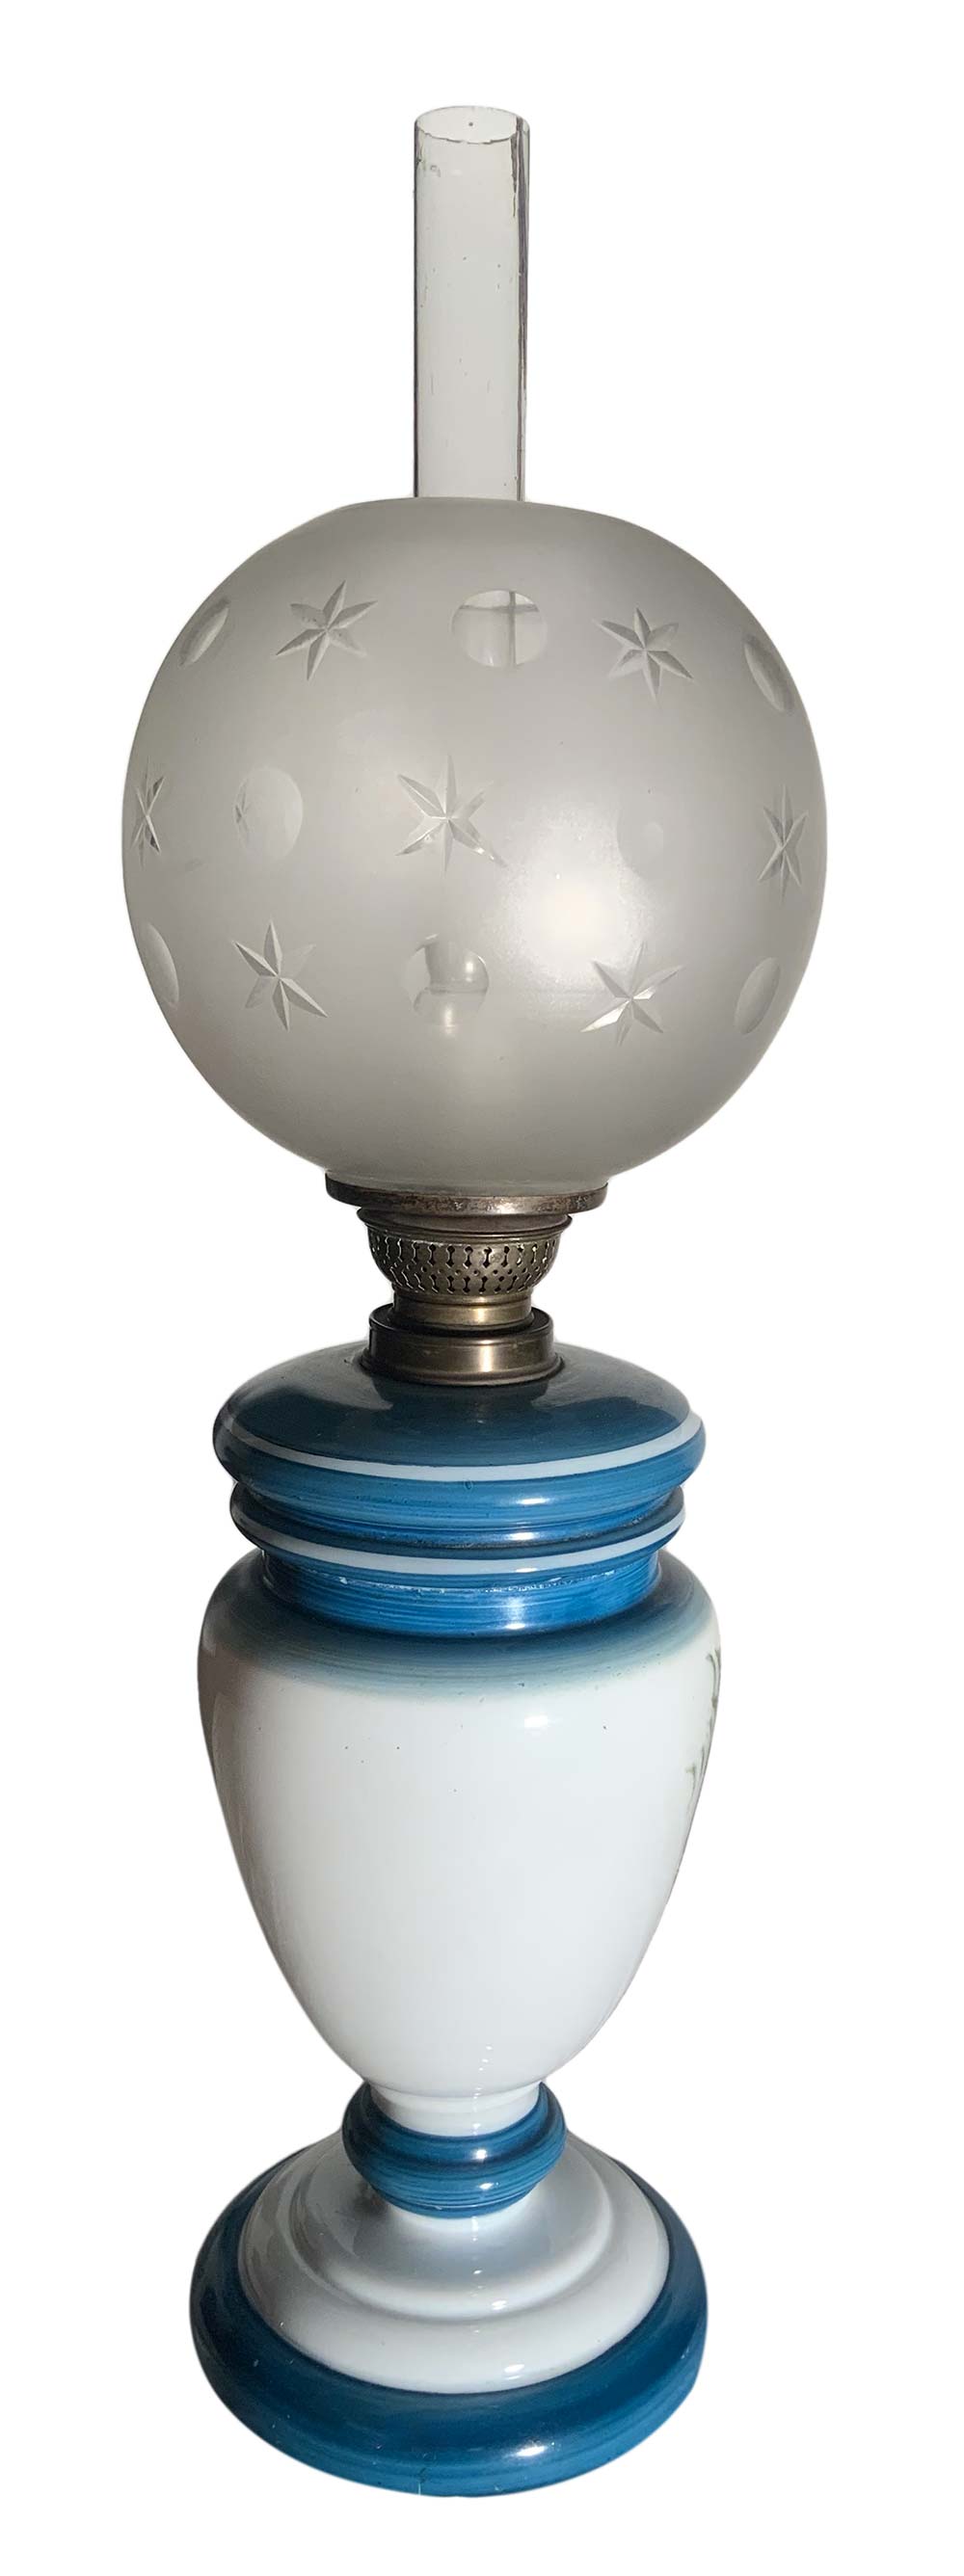 Lamp in blue opaline with floral decorations . Late nineteenth century. H 57 cm - Image 2 of 5